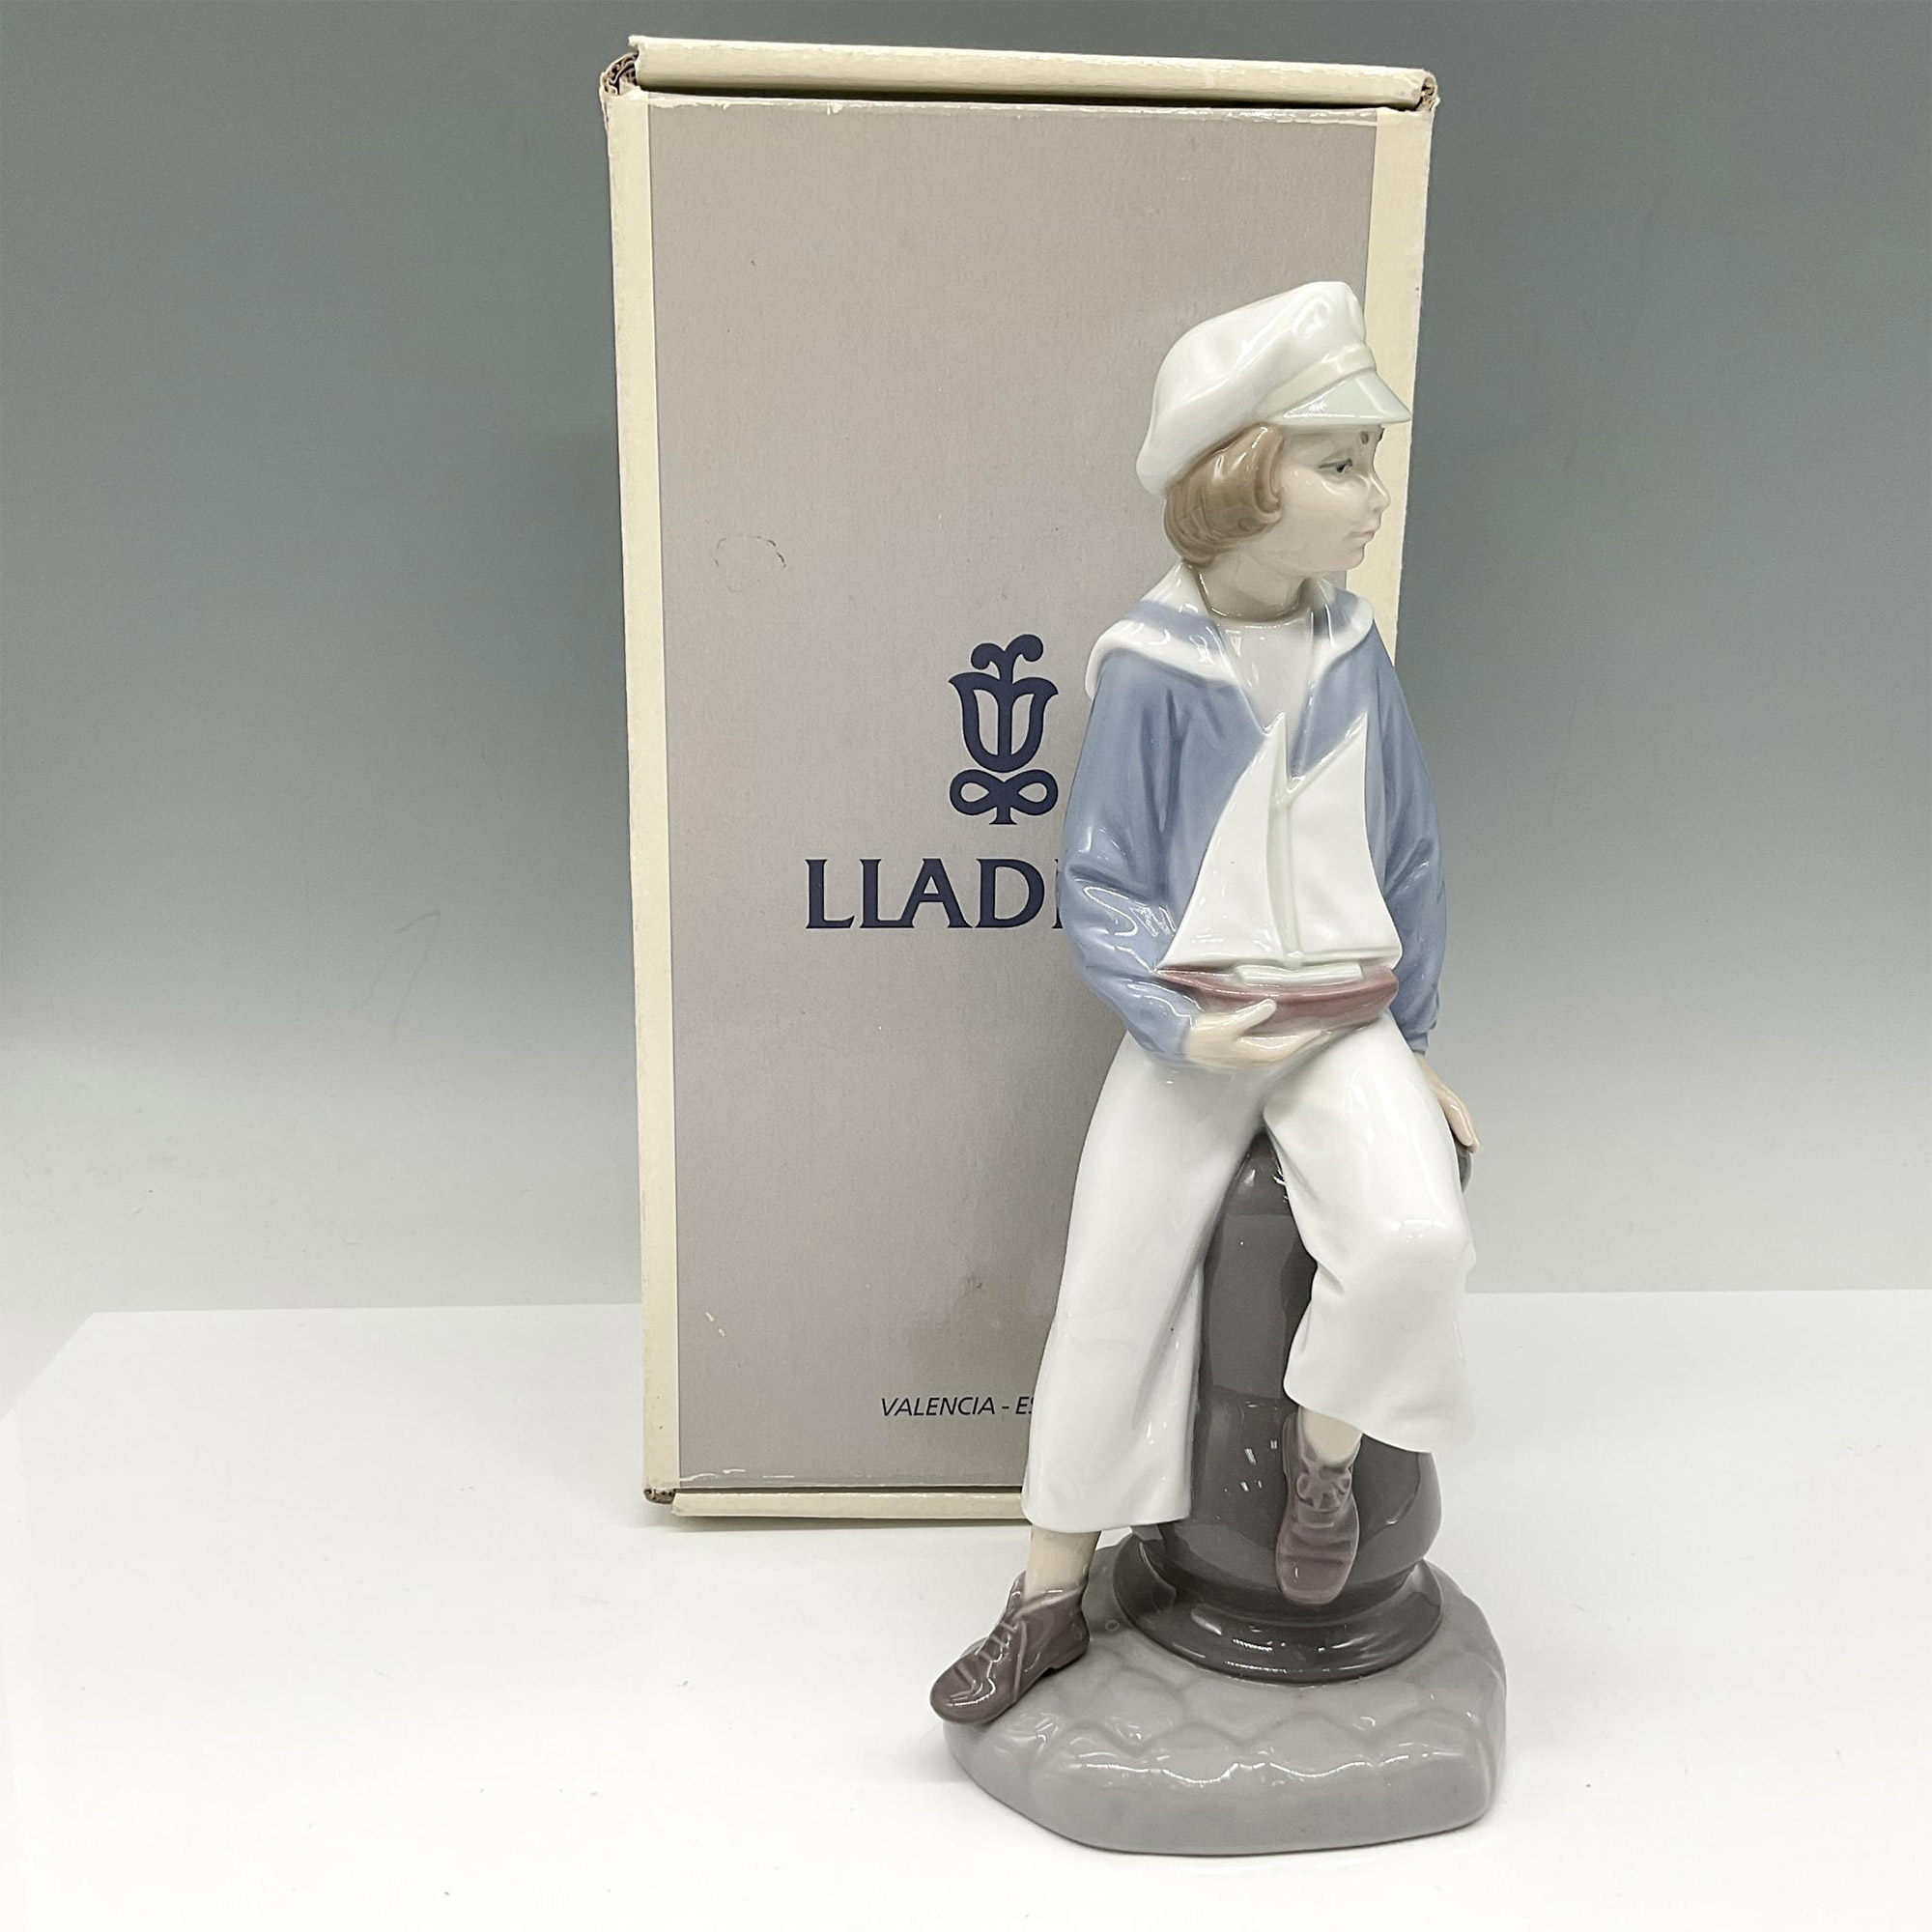 Boy with Yacht - Lladro Porcelain Figurine - Image 4 of 4